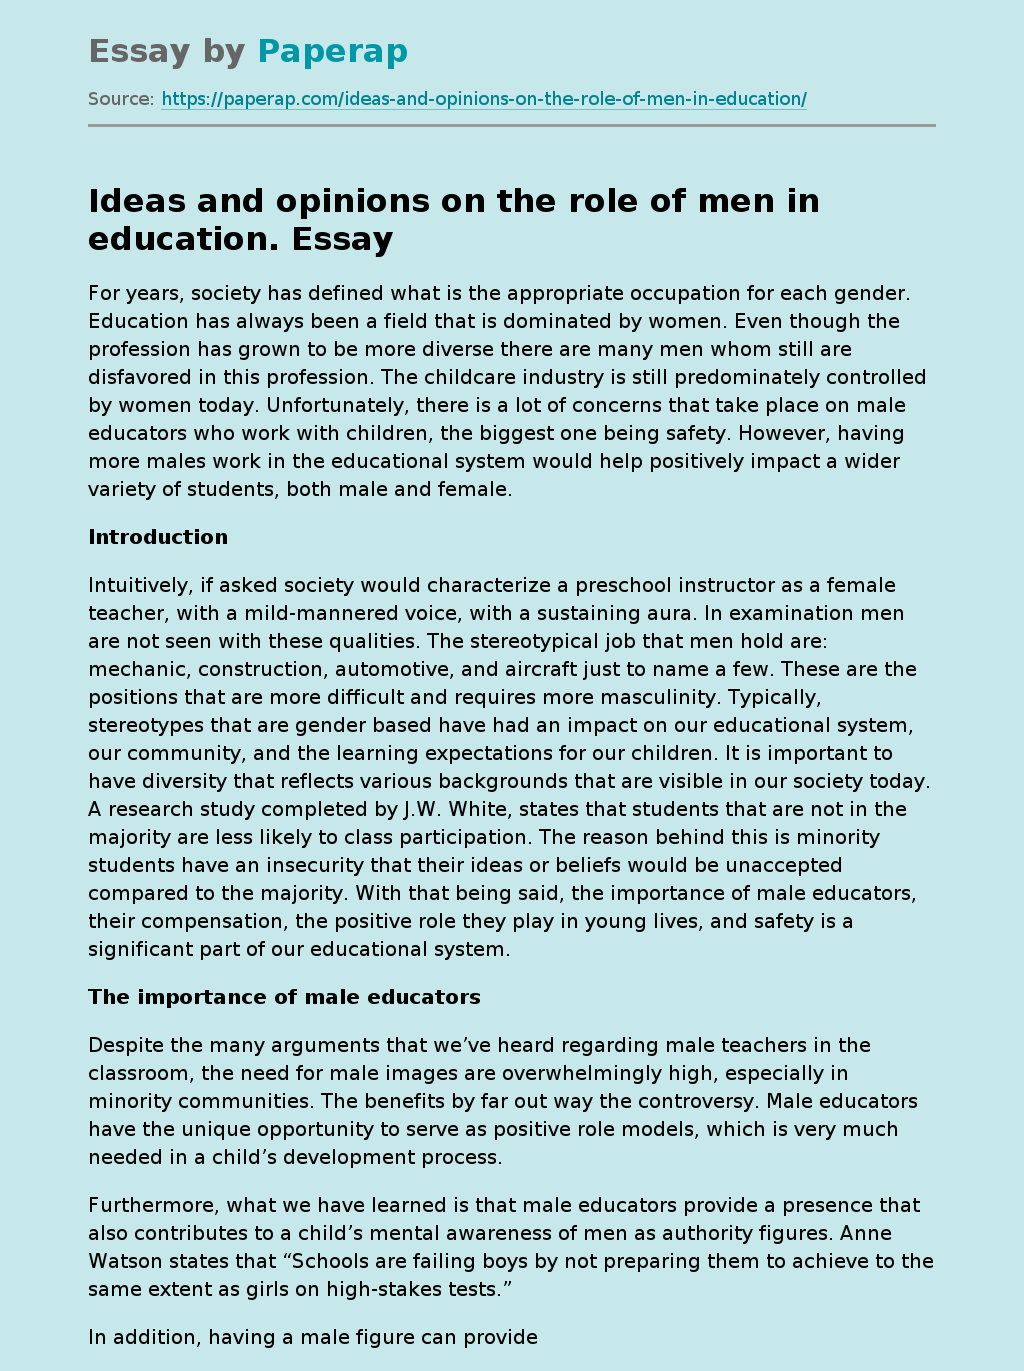 Ideas and opinions on the role of men in education.